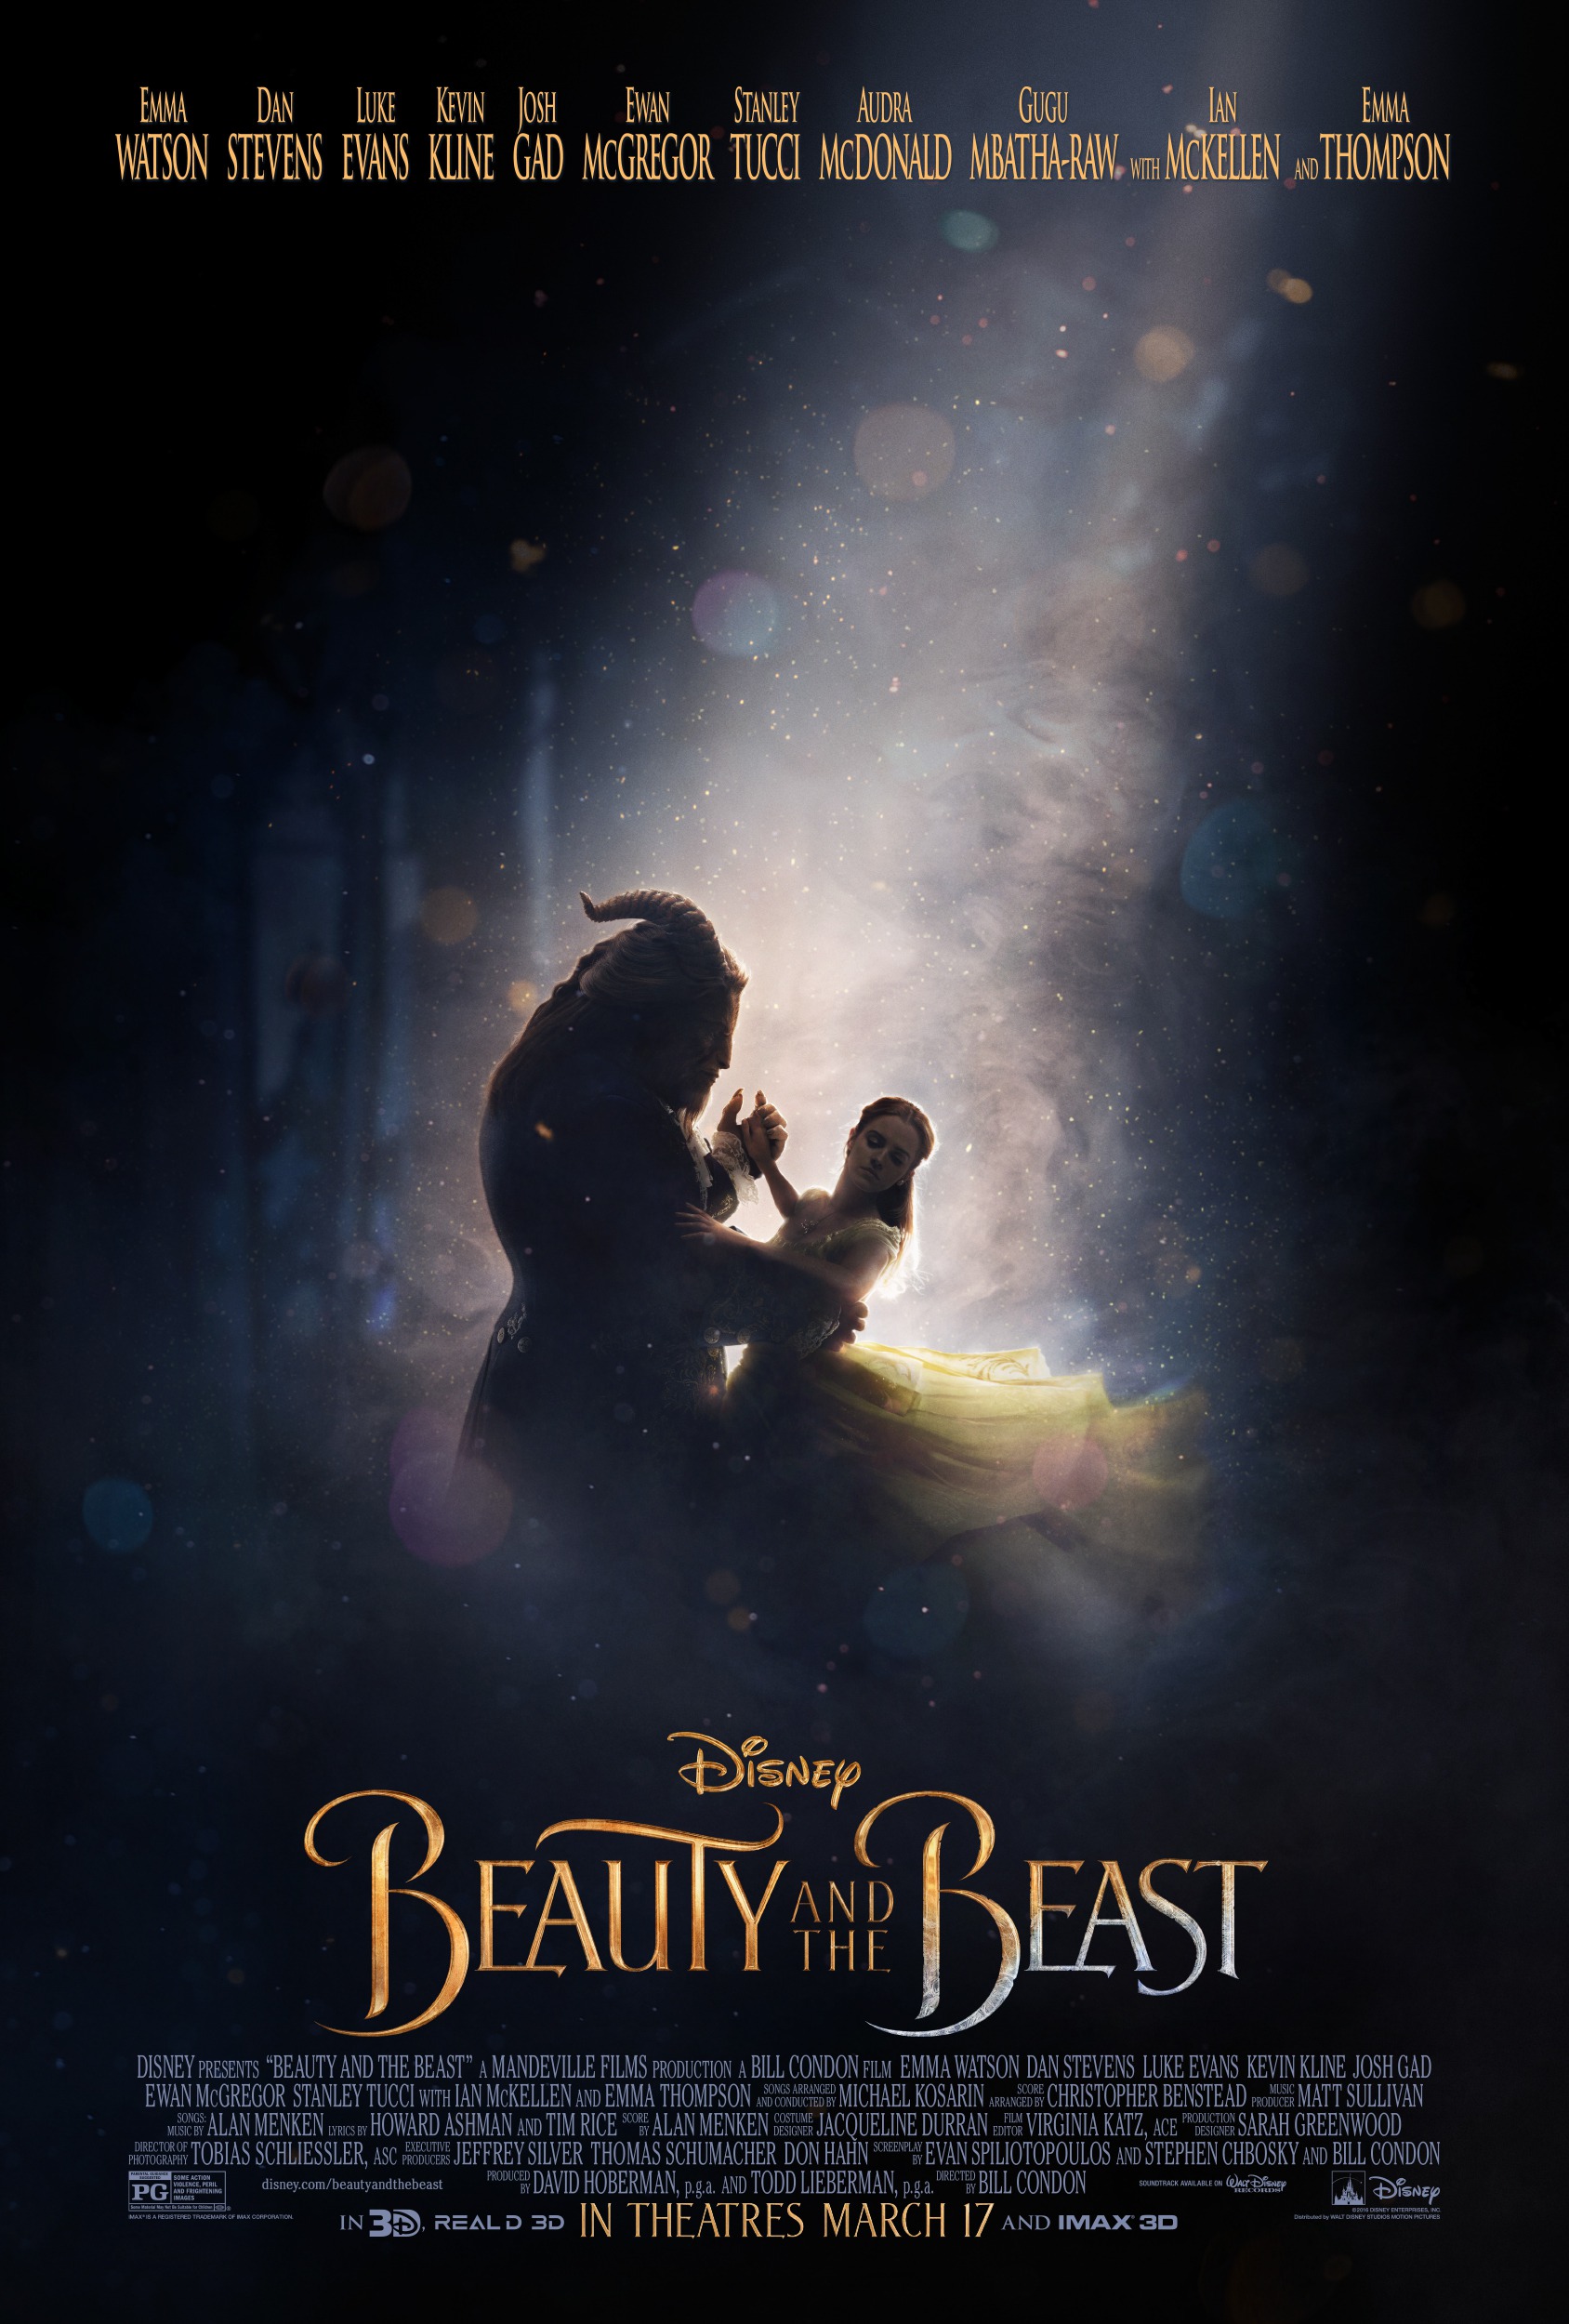 http://vignette4.wikia.nocookie.net/disney/images/a/a3/Beauty_and_the_Beast_official_poster.jpg/revision/latest?cb=20161110224806